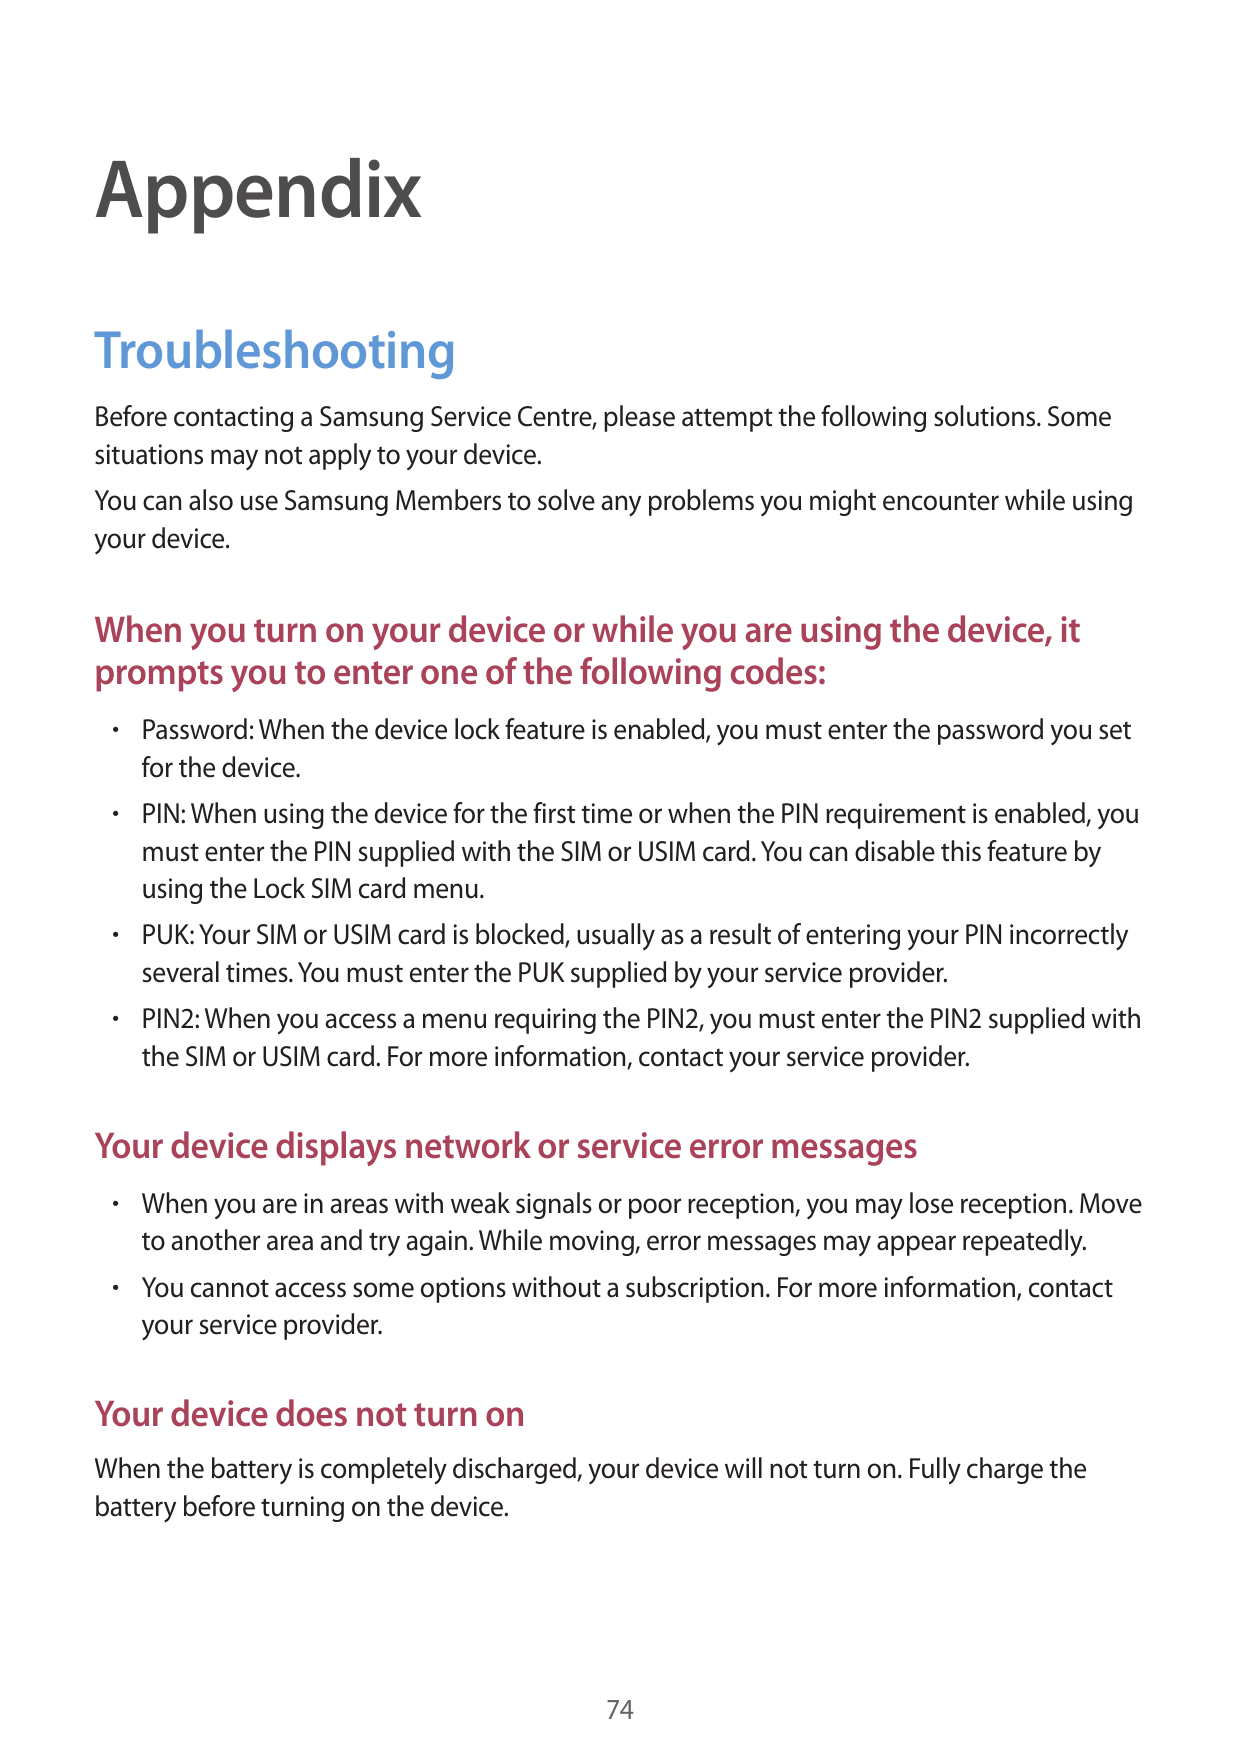 AppendixTroubleshootingBefore contacting a Samsung Service Centre, please attempt the following solutions. Somesituations may no